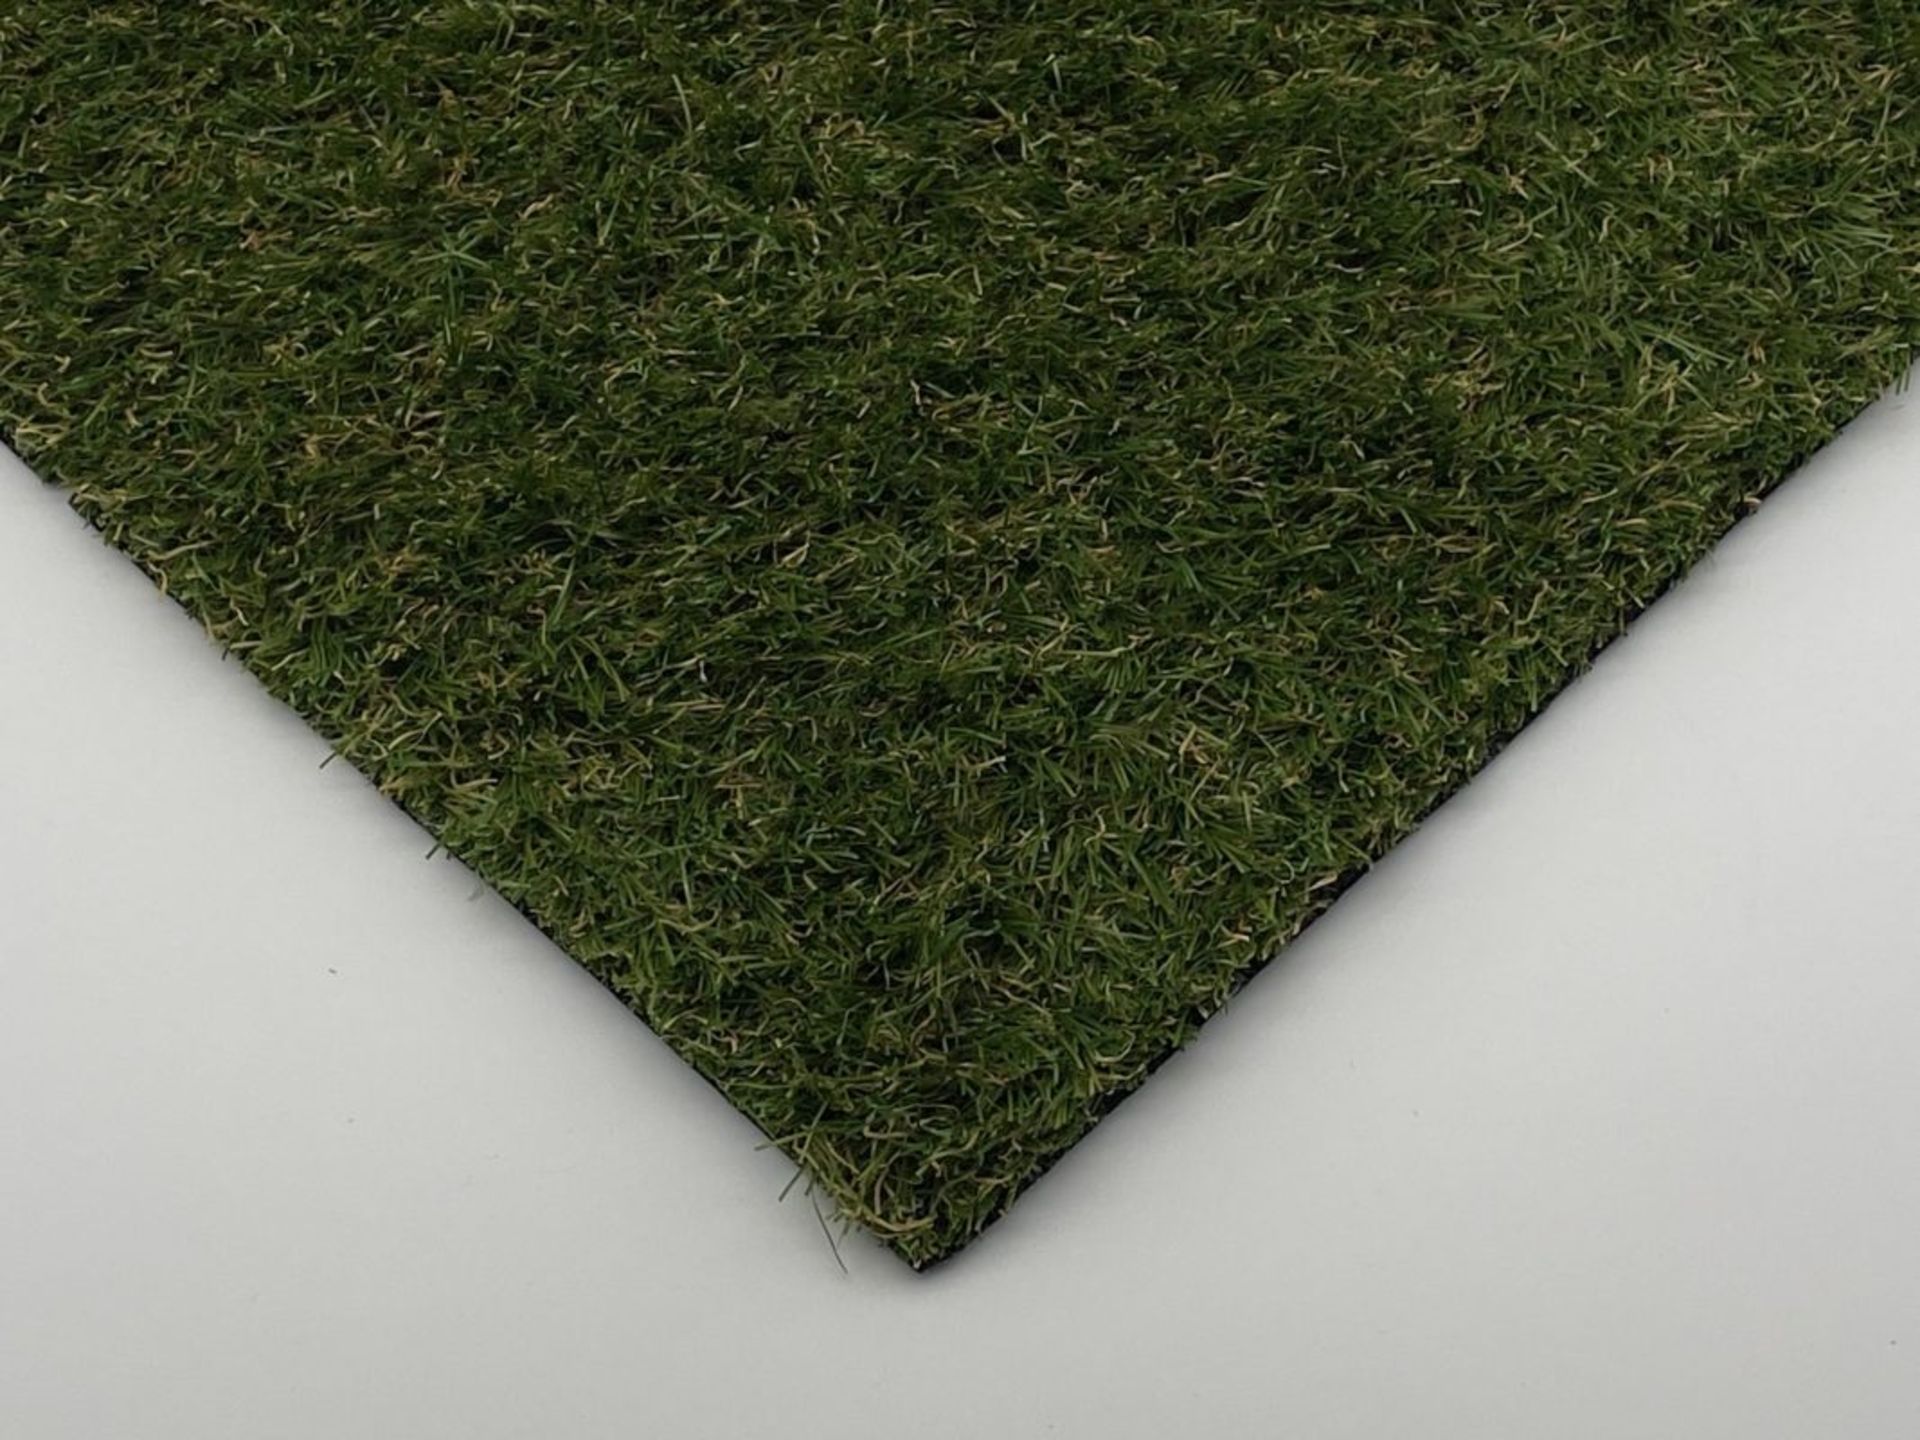 ***FREE DELIVERY & NO HAMMER VAT*** BRAND NEW, ARTIFICIAL GRASS FROM THE MIAMI RANGE 30MM - Image 3 of 4